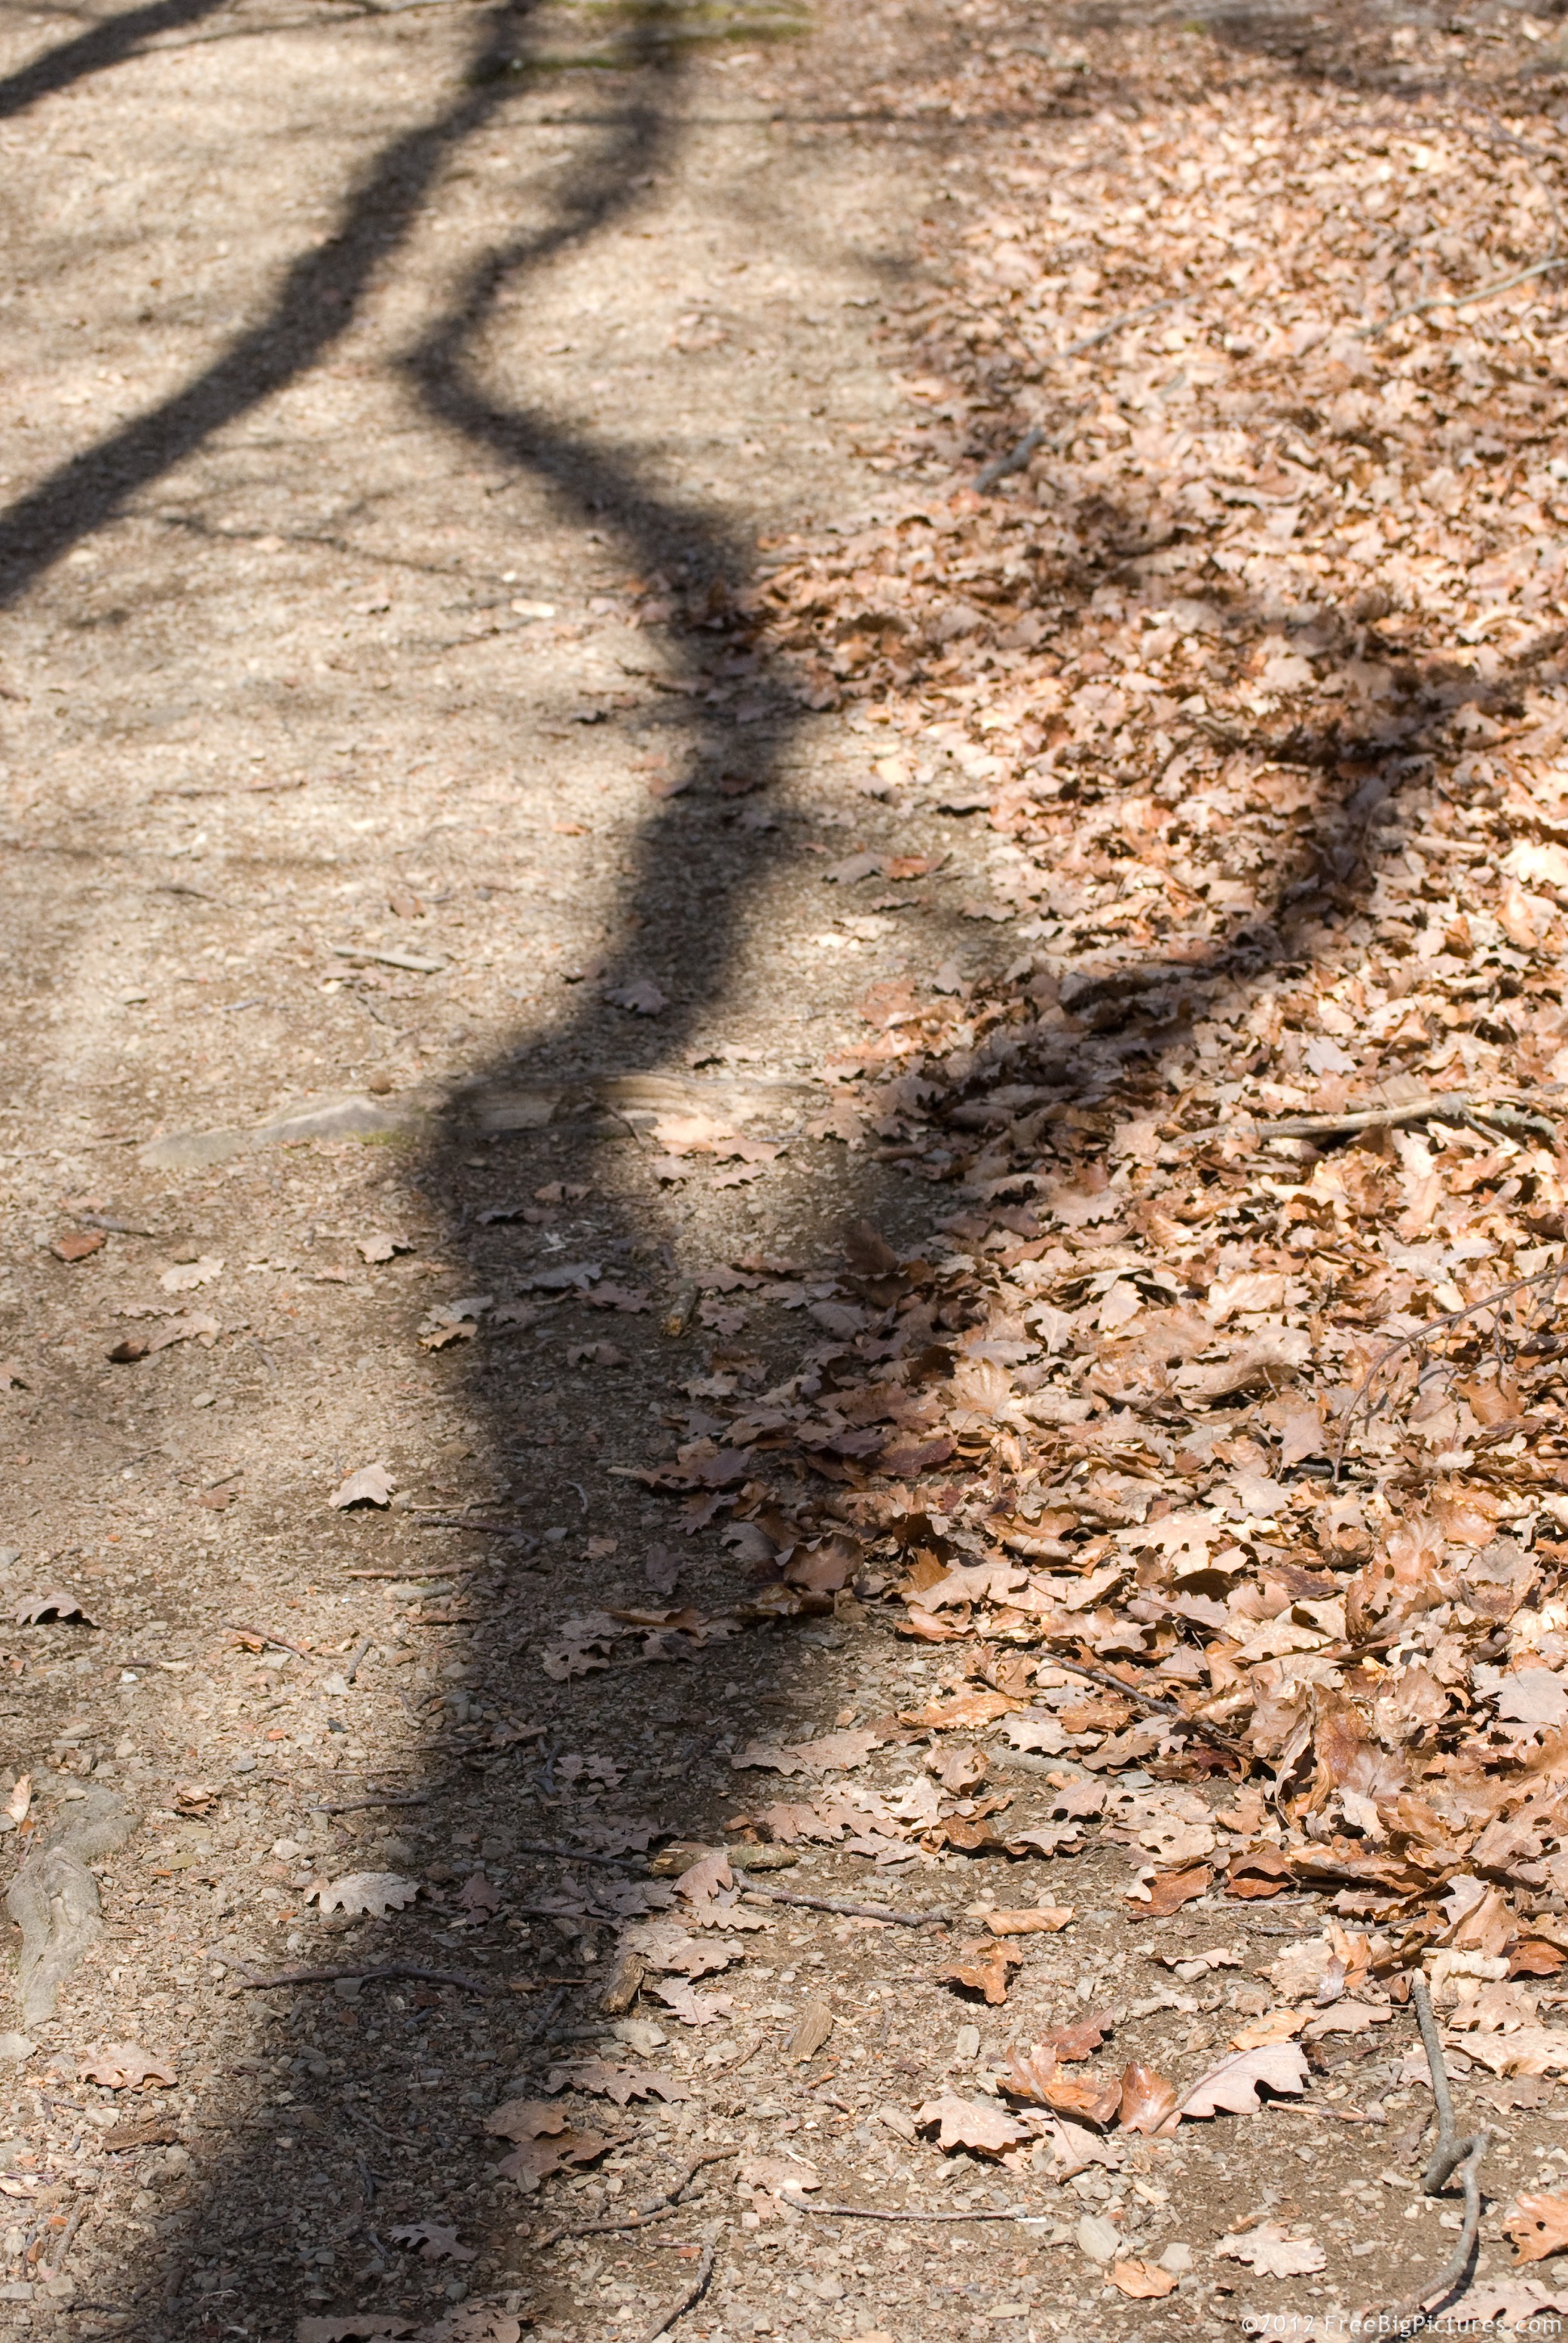 A few branch shadows in a sunny day, projected to a circulated track in a deciduous forest with trees without leaves prepared for hibernation in fall